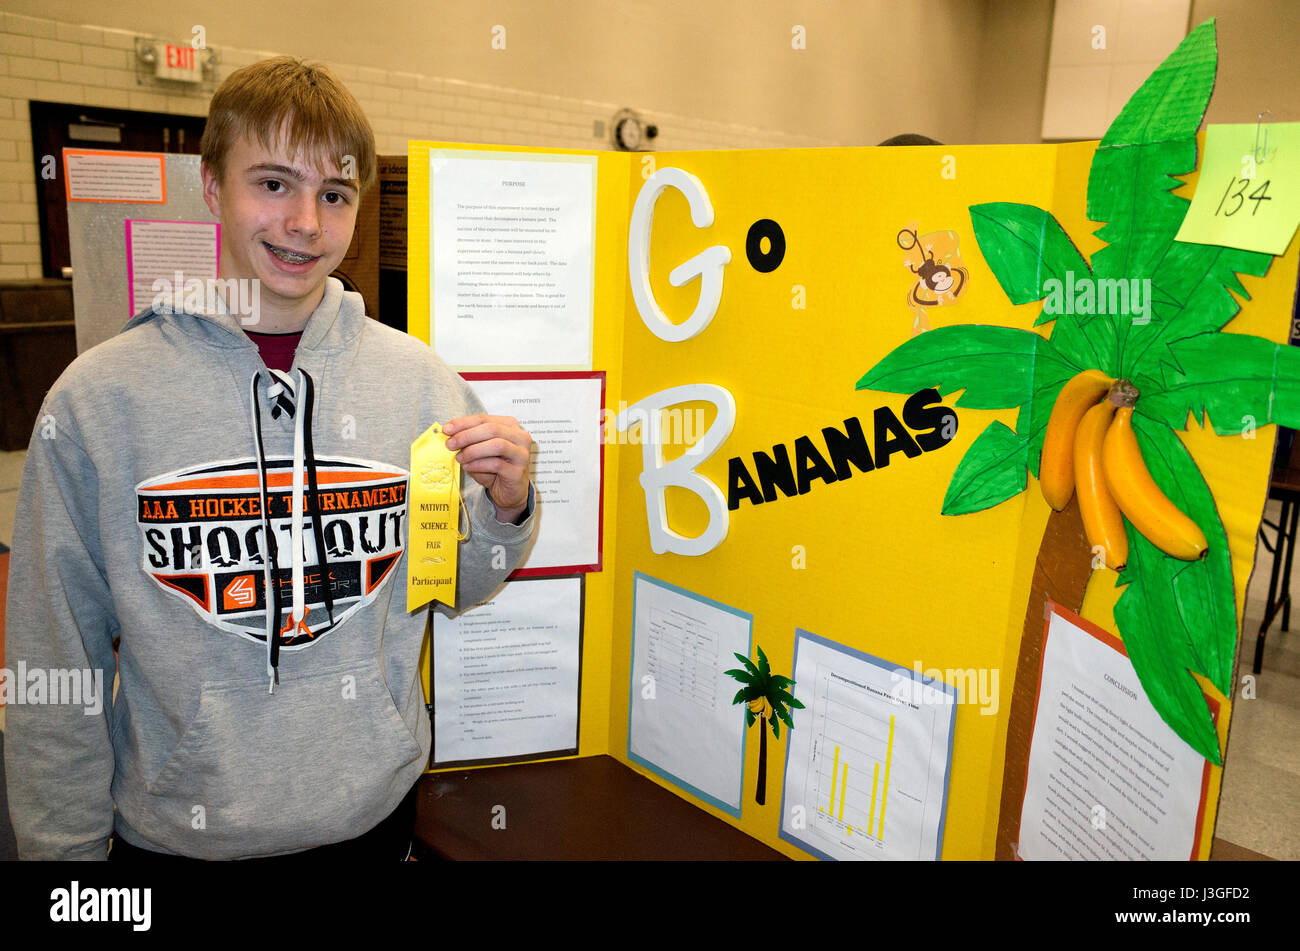 Junior high student holding an award ribbon for a study on the decomposition of bananas in a science poster project. St Paul Minnesota MN USA Stock Photo